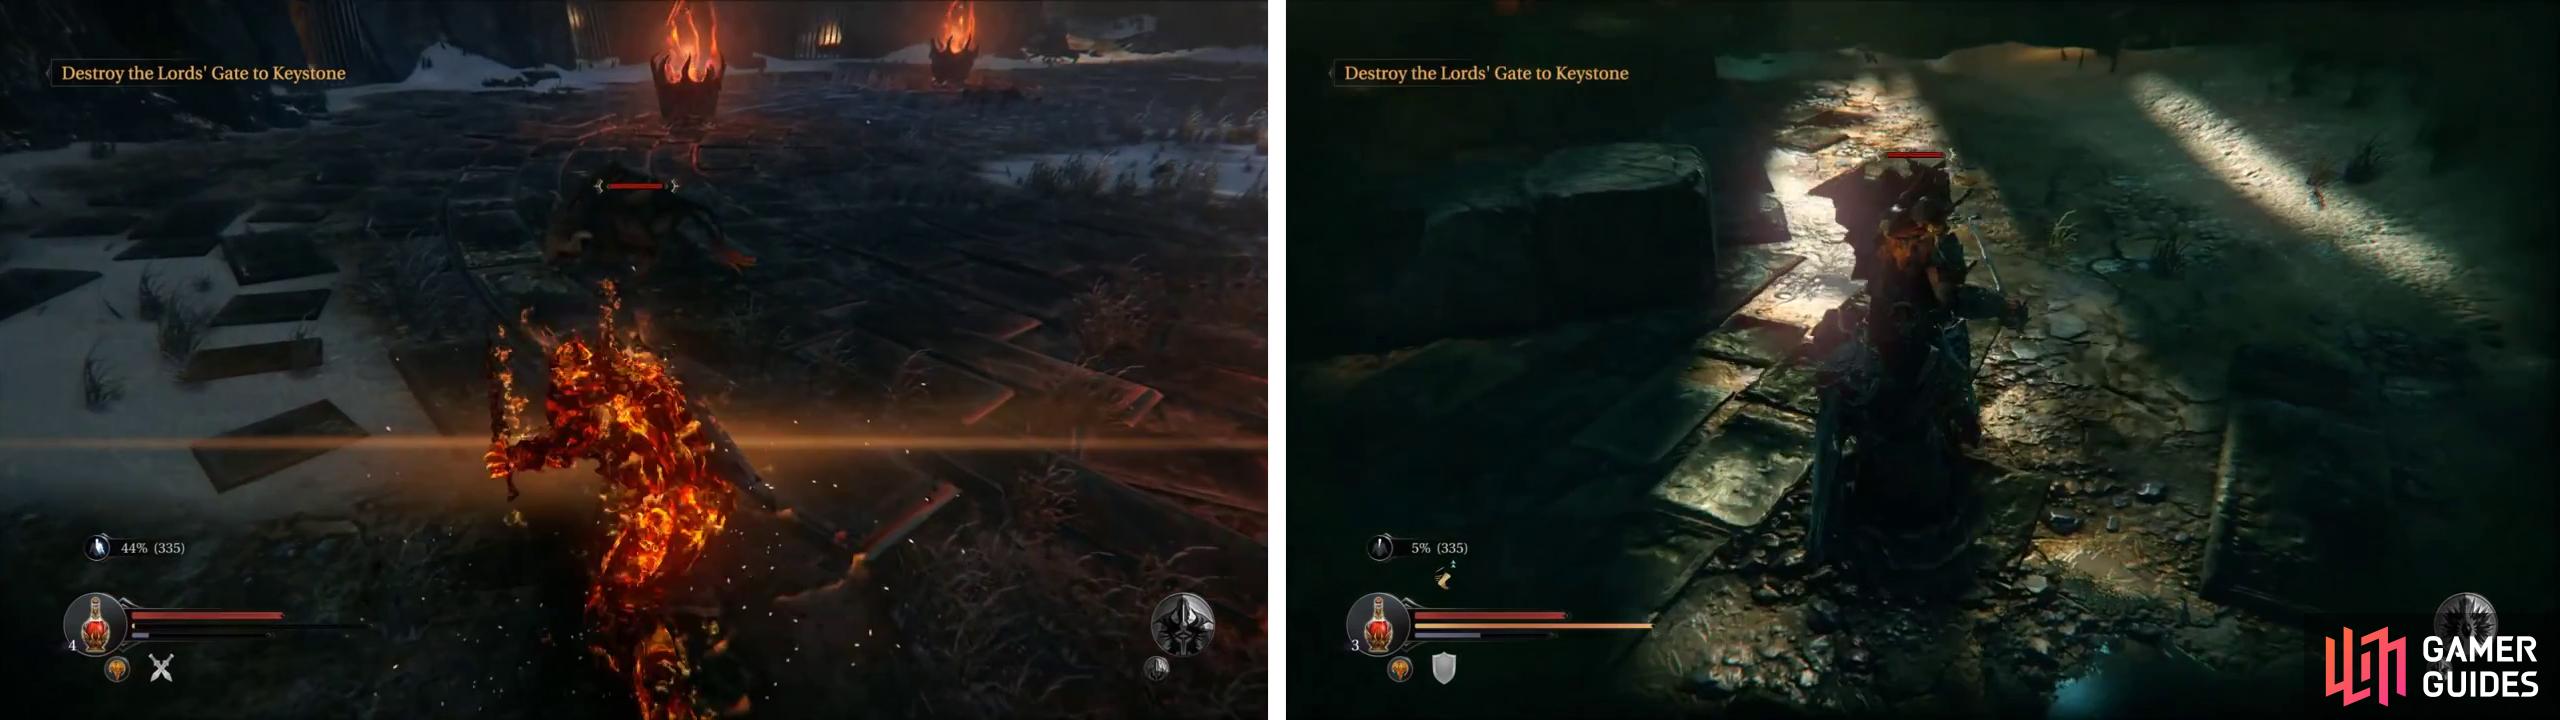 Mimic creates a fire elemental ontop of Harkyn, doubling damage (left). Shift allows Harkyn to sneak up on enemies undetected (right).